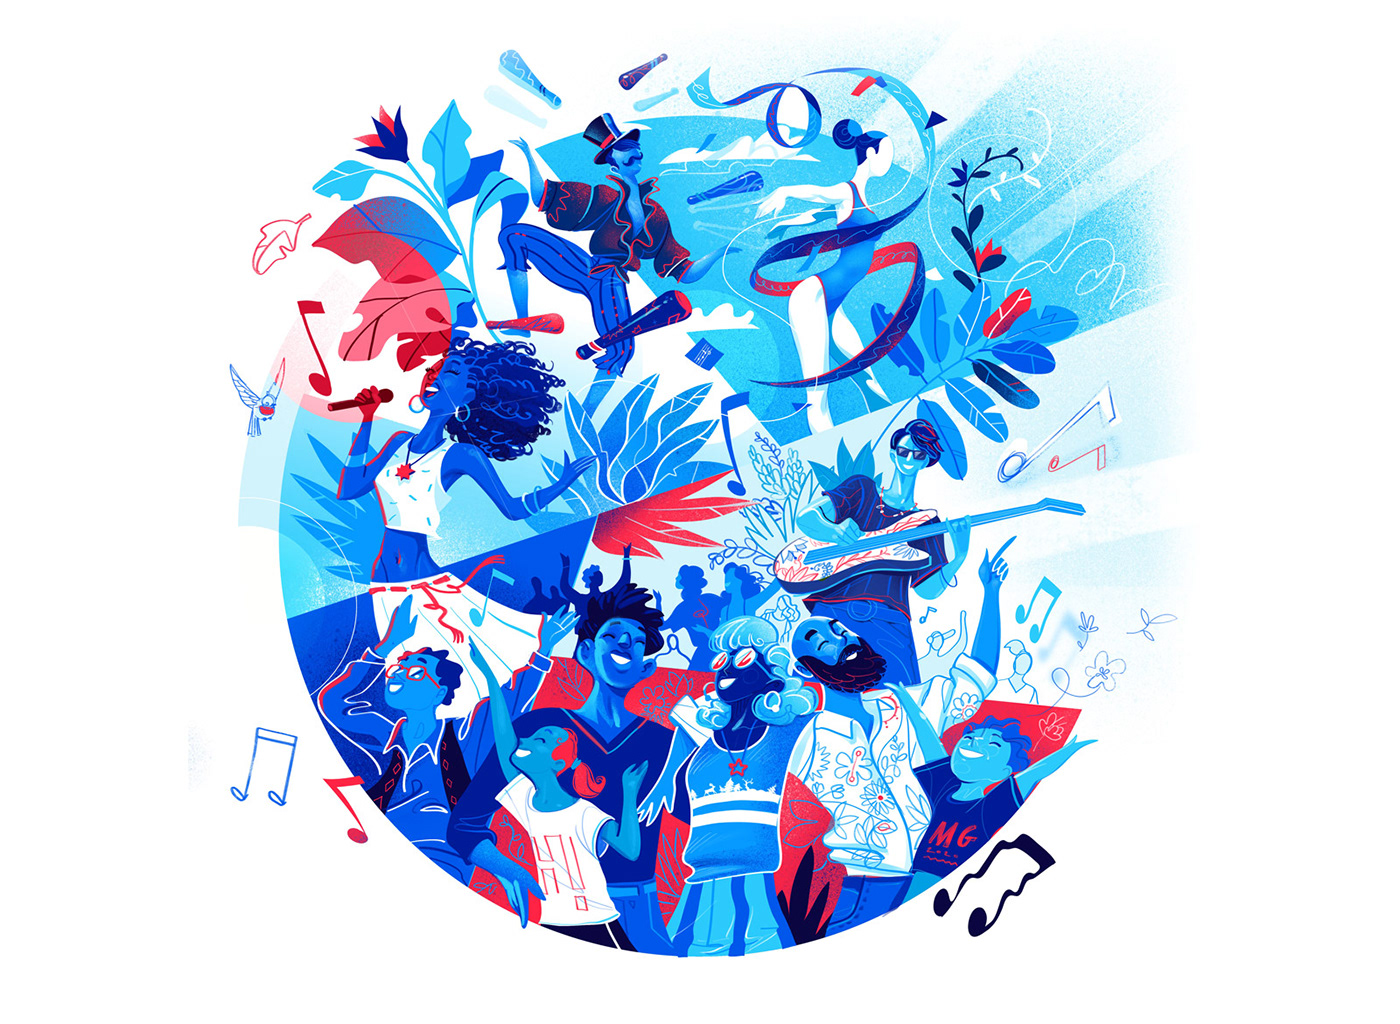 characters community fest festival Fun hero illustration  ILLUSTRATION  lifestyle party people